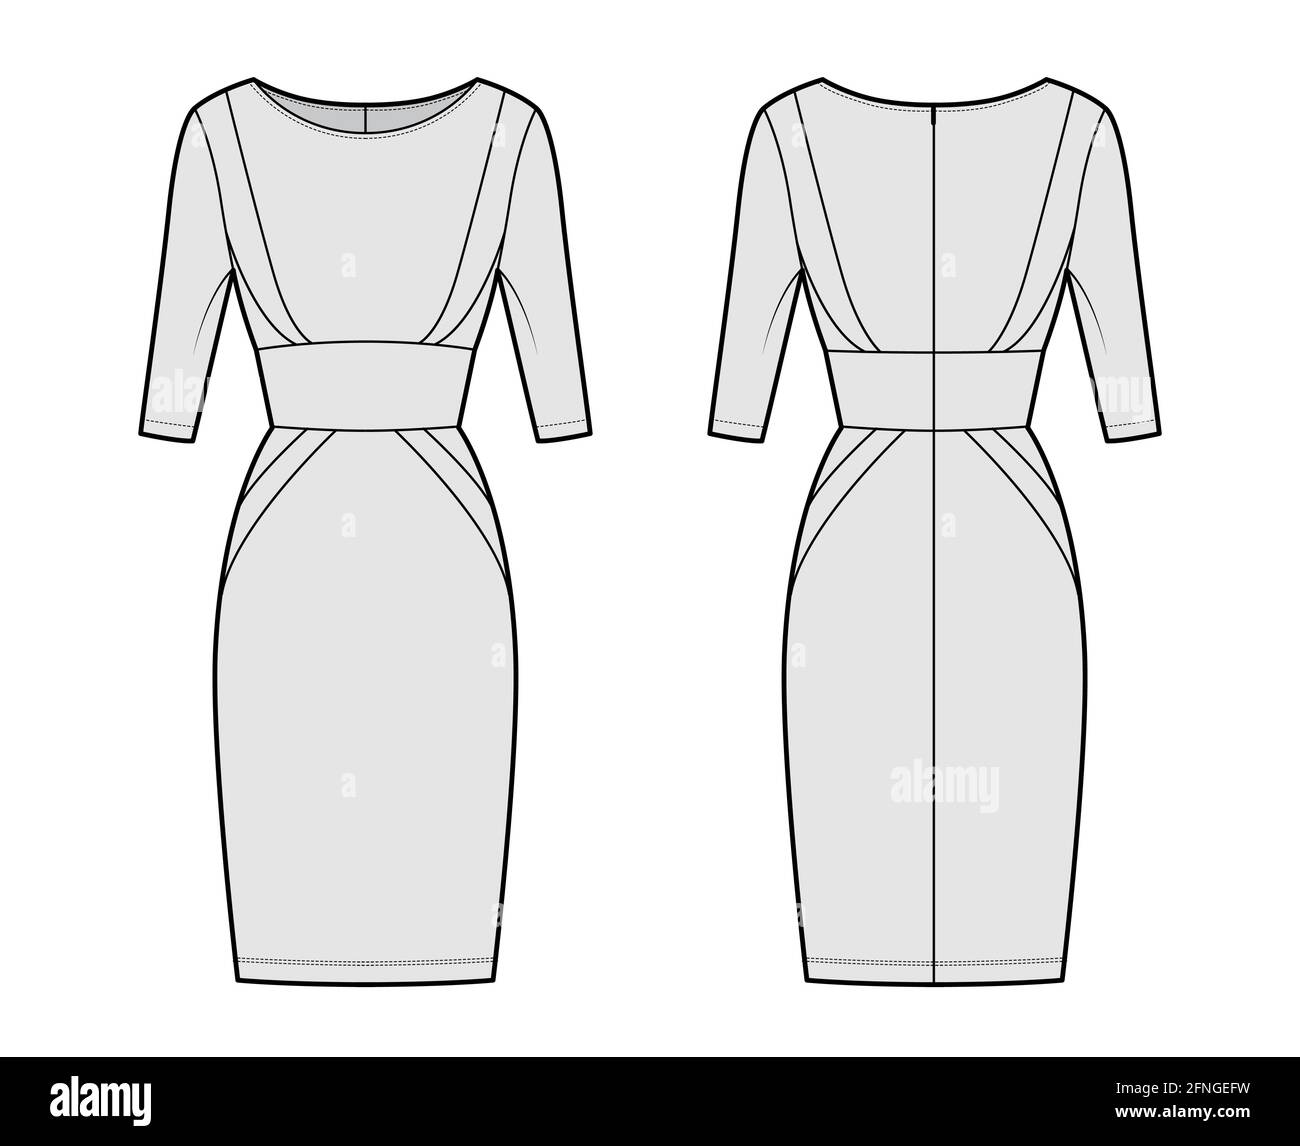 Dress panel tube technical fashion illustration with hourglass ...